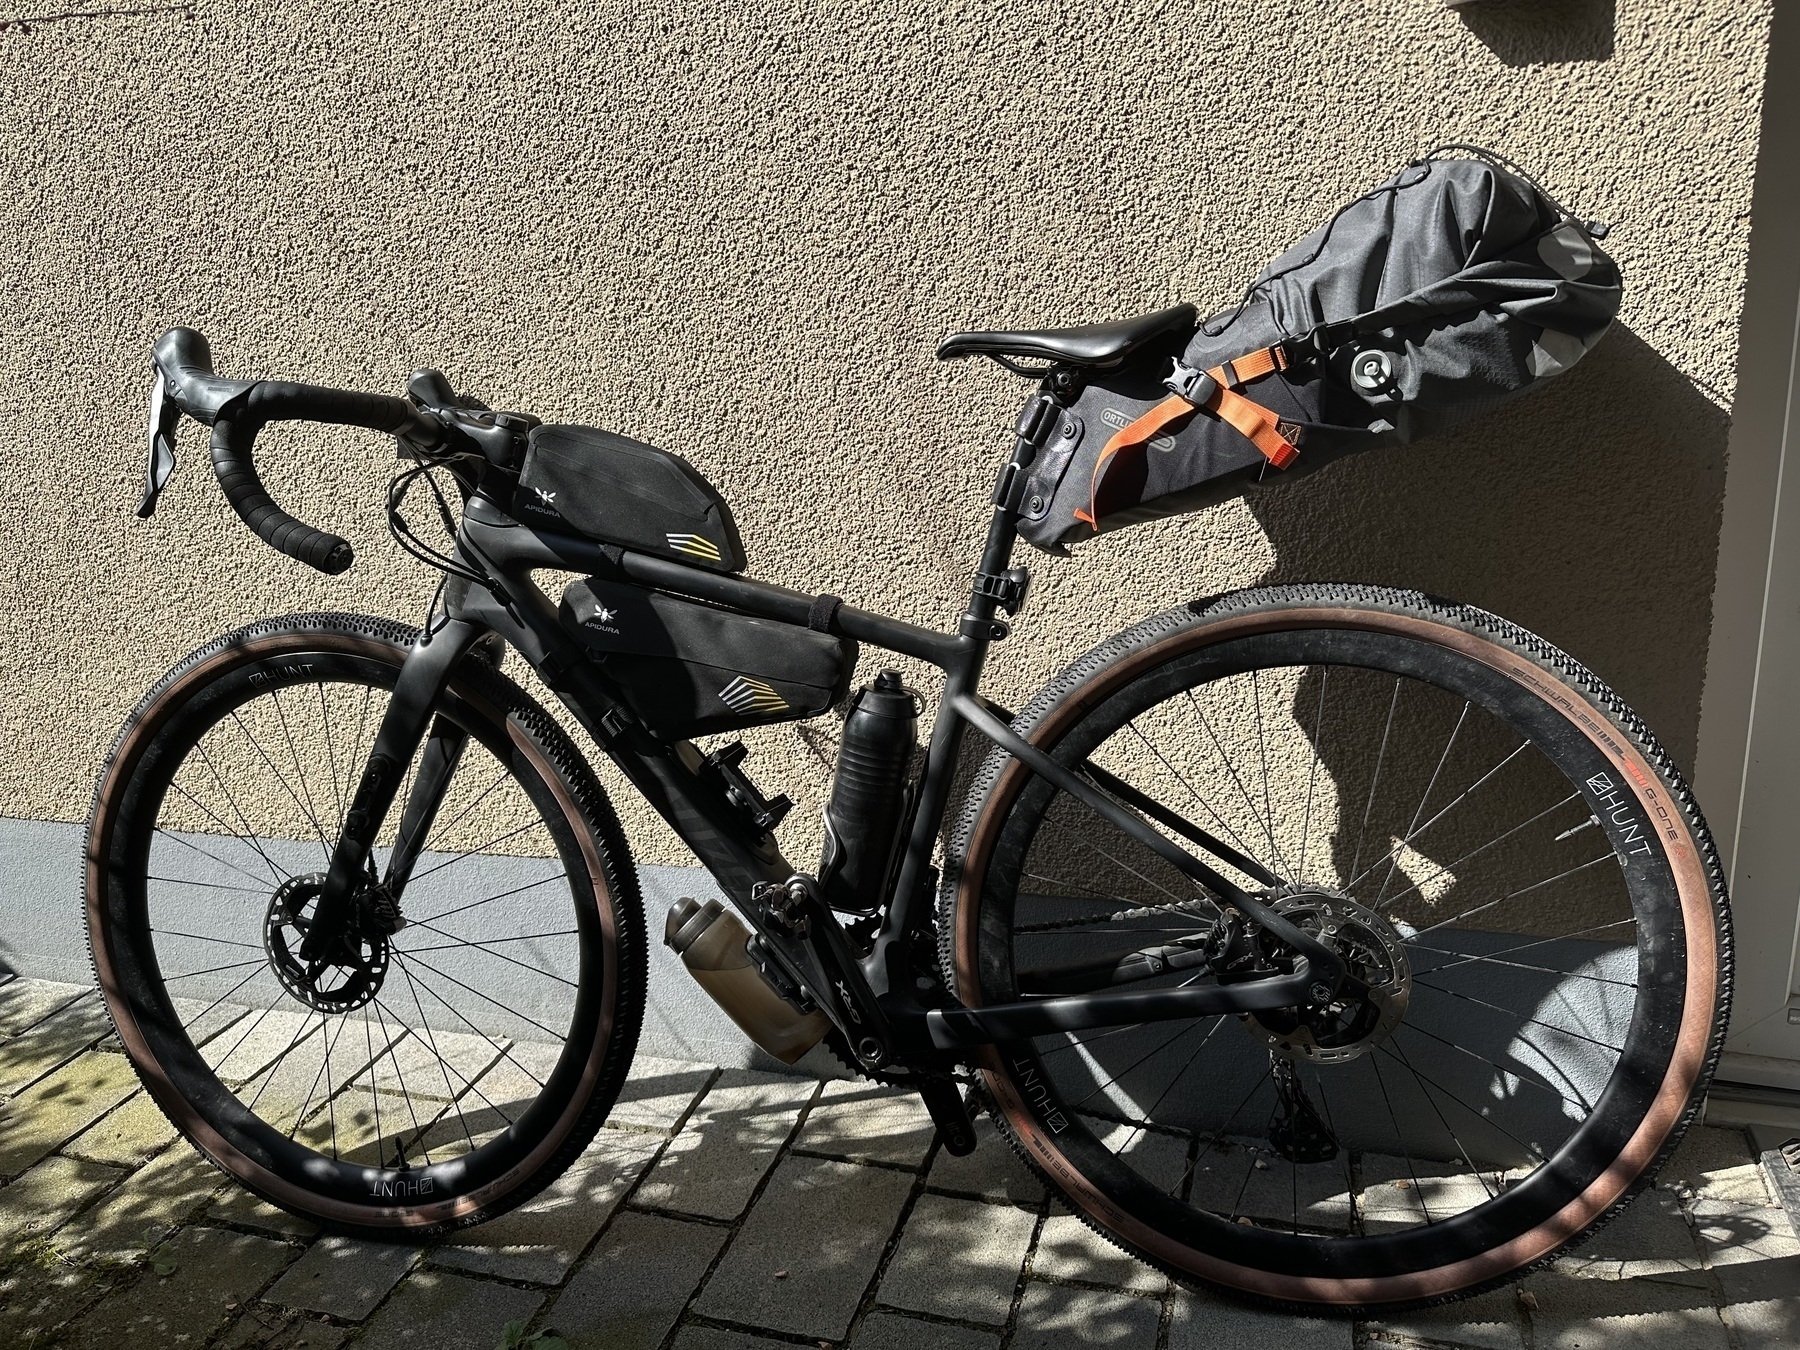 Gravel Bike with bike packing bags attached.